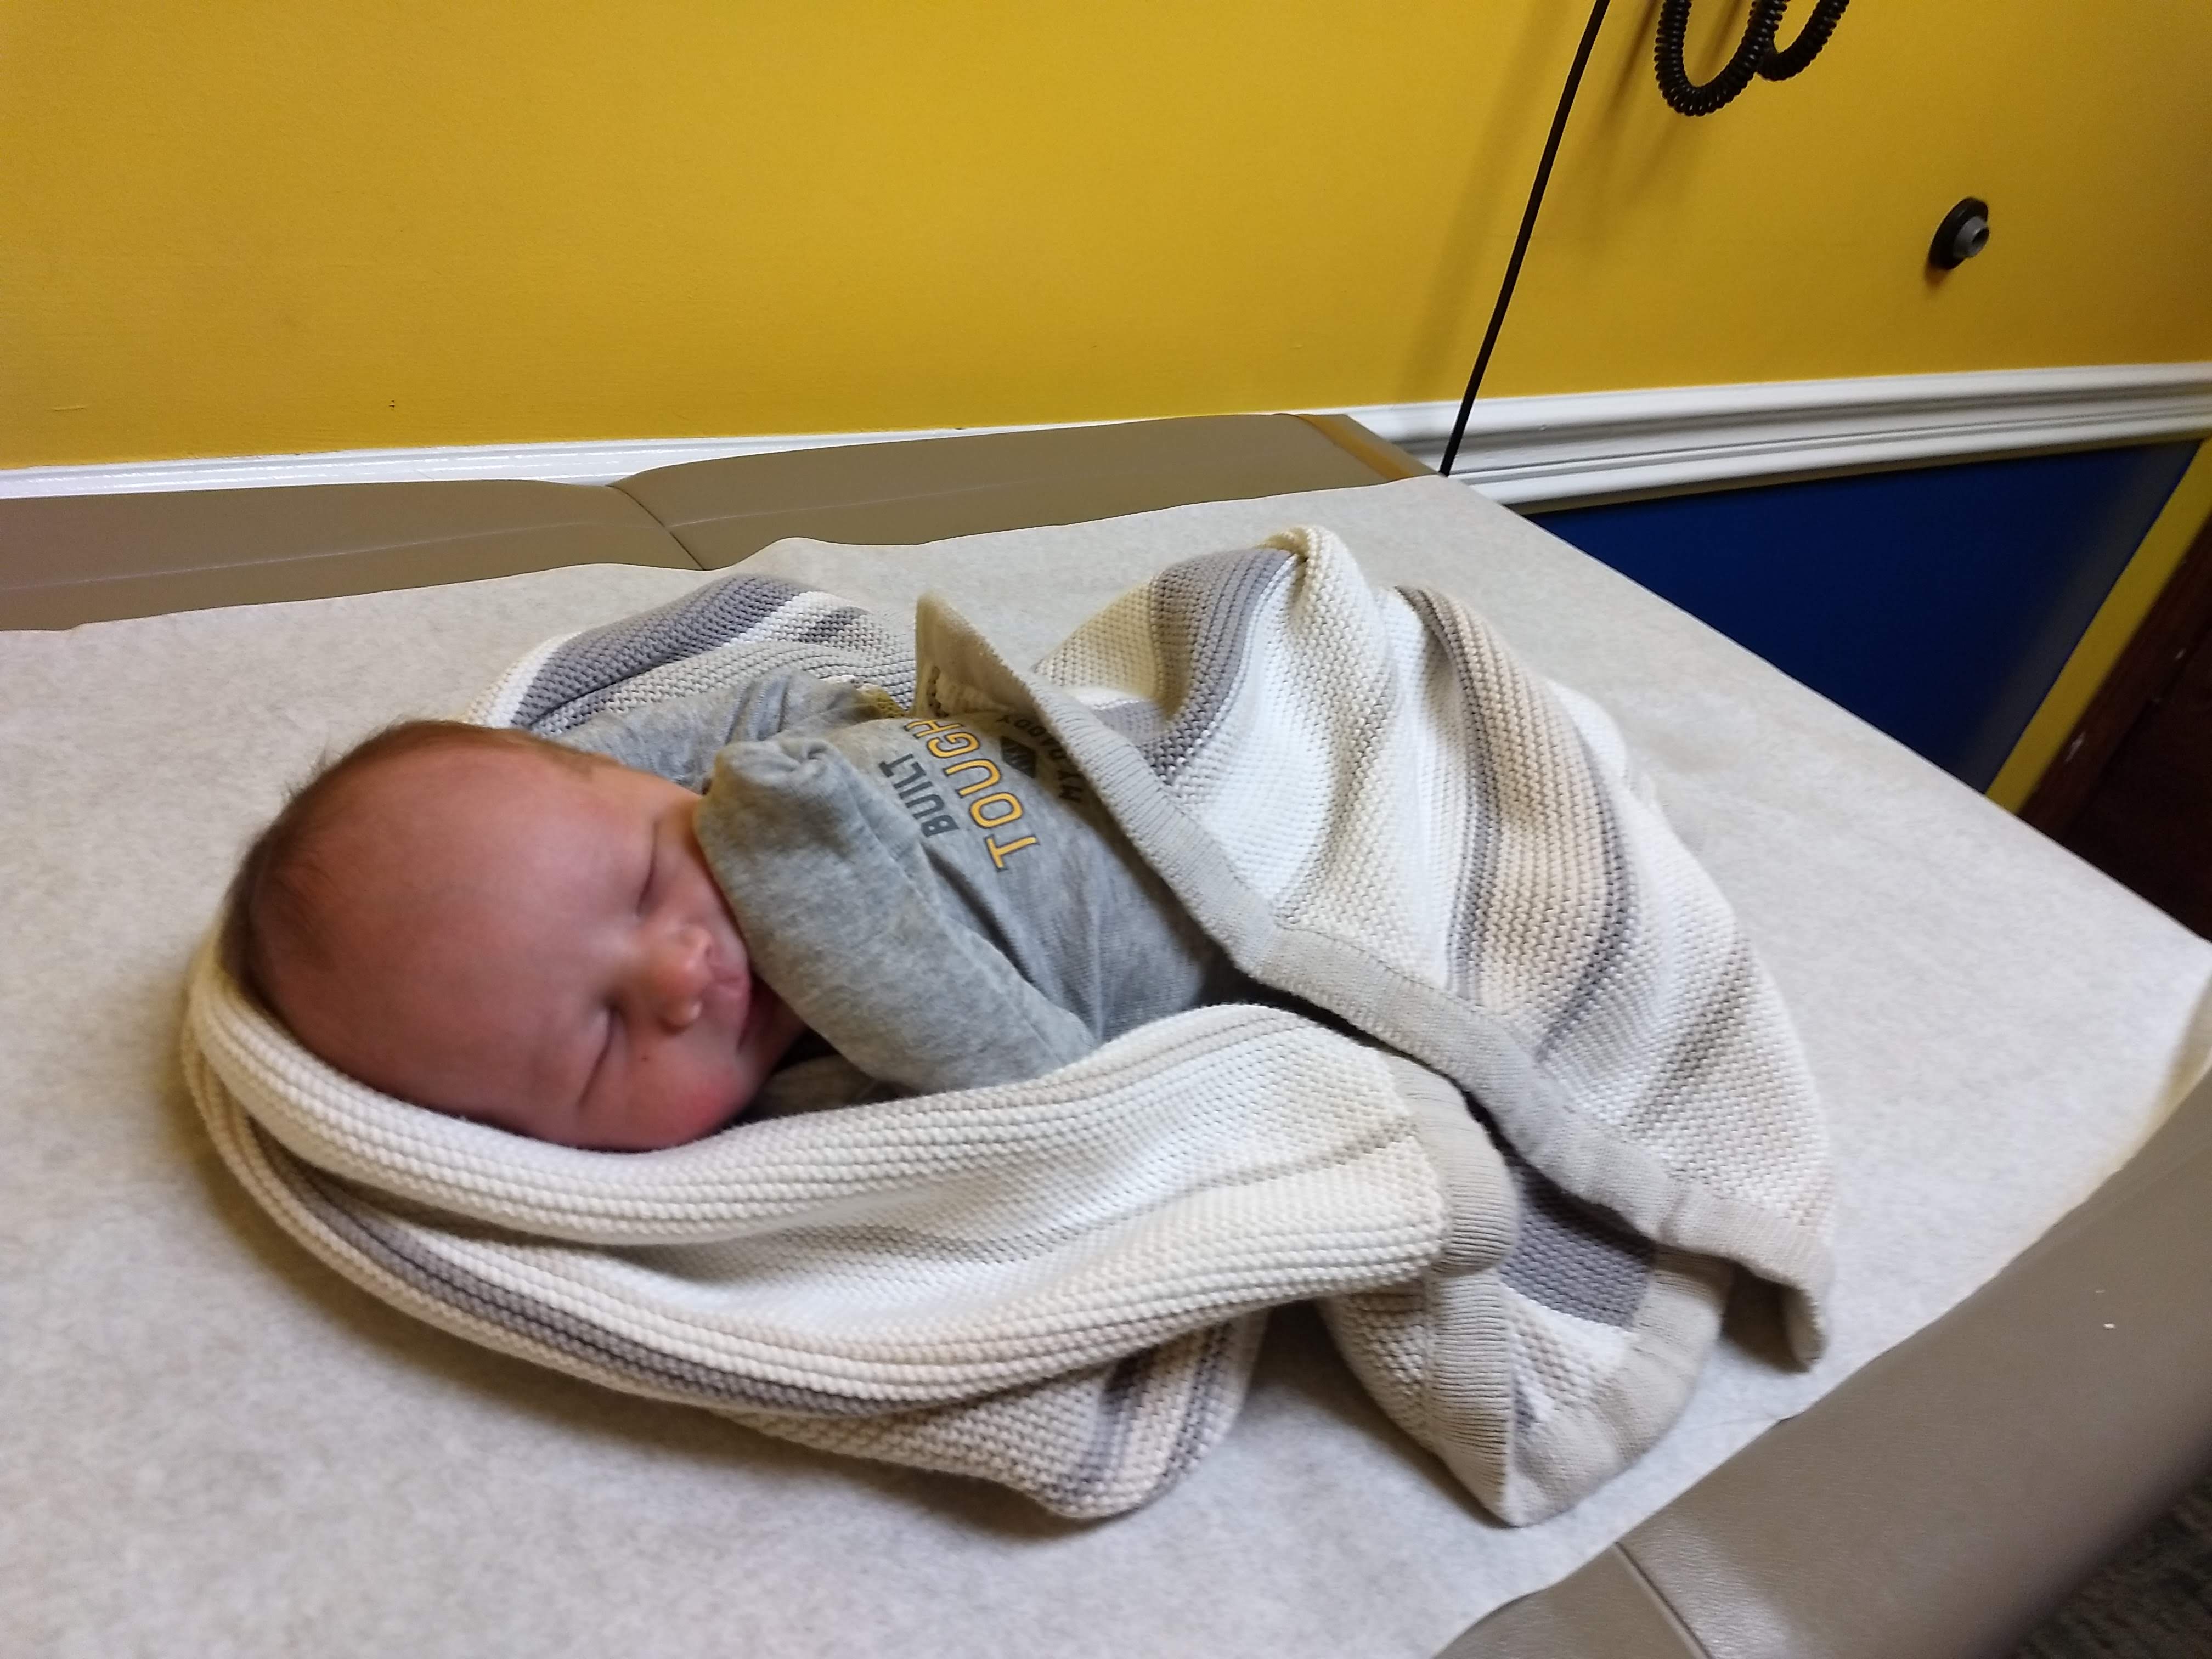 1st pediatrician's appointment